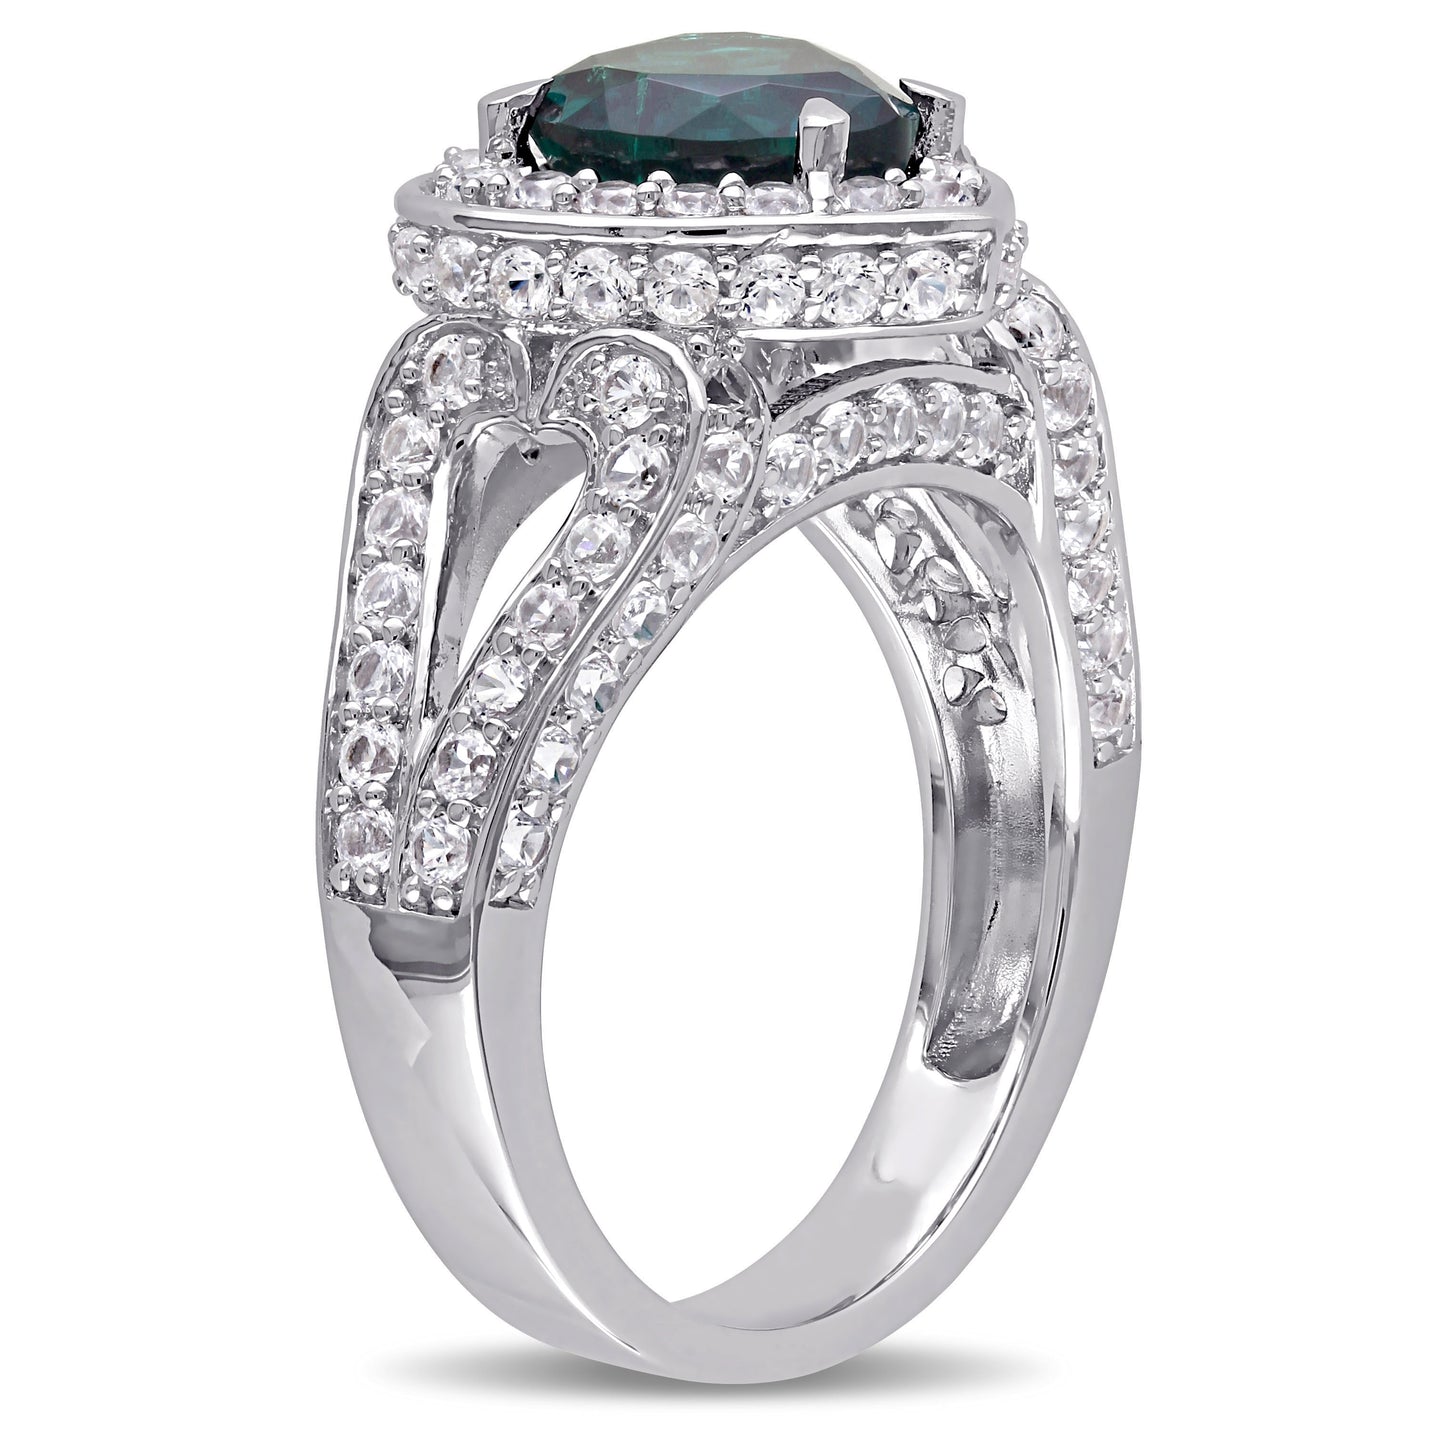 Created Emerald & White Sapphire Heart Ring in Sterling Silver